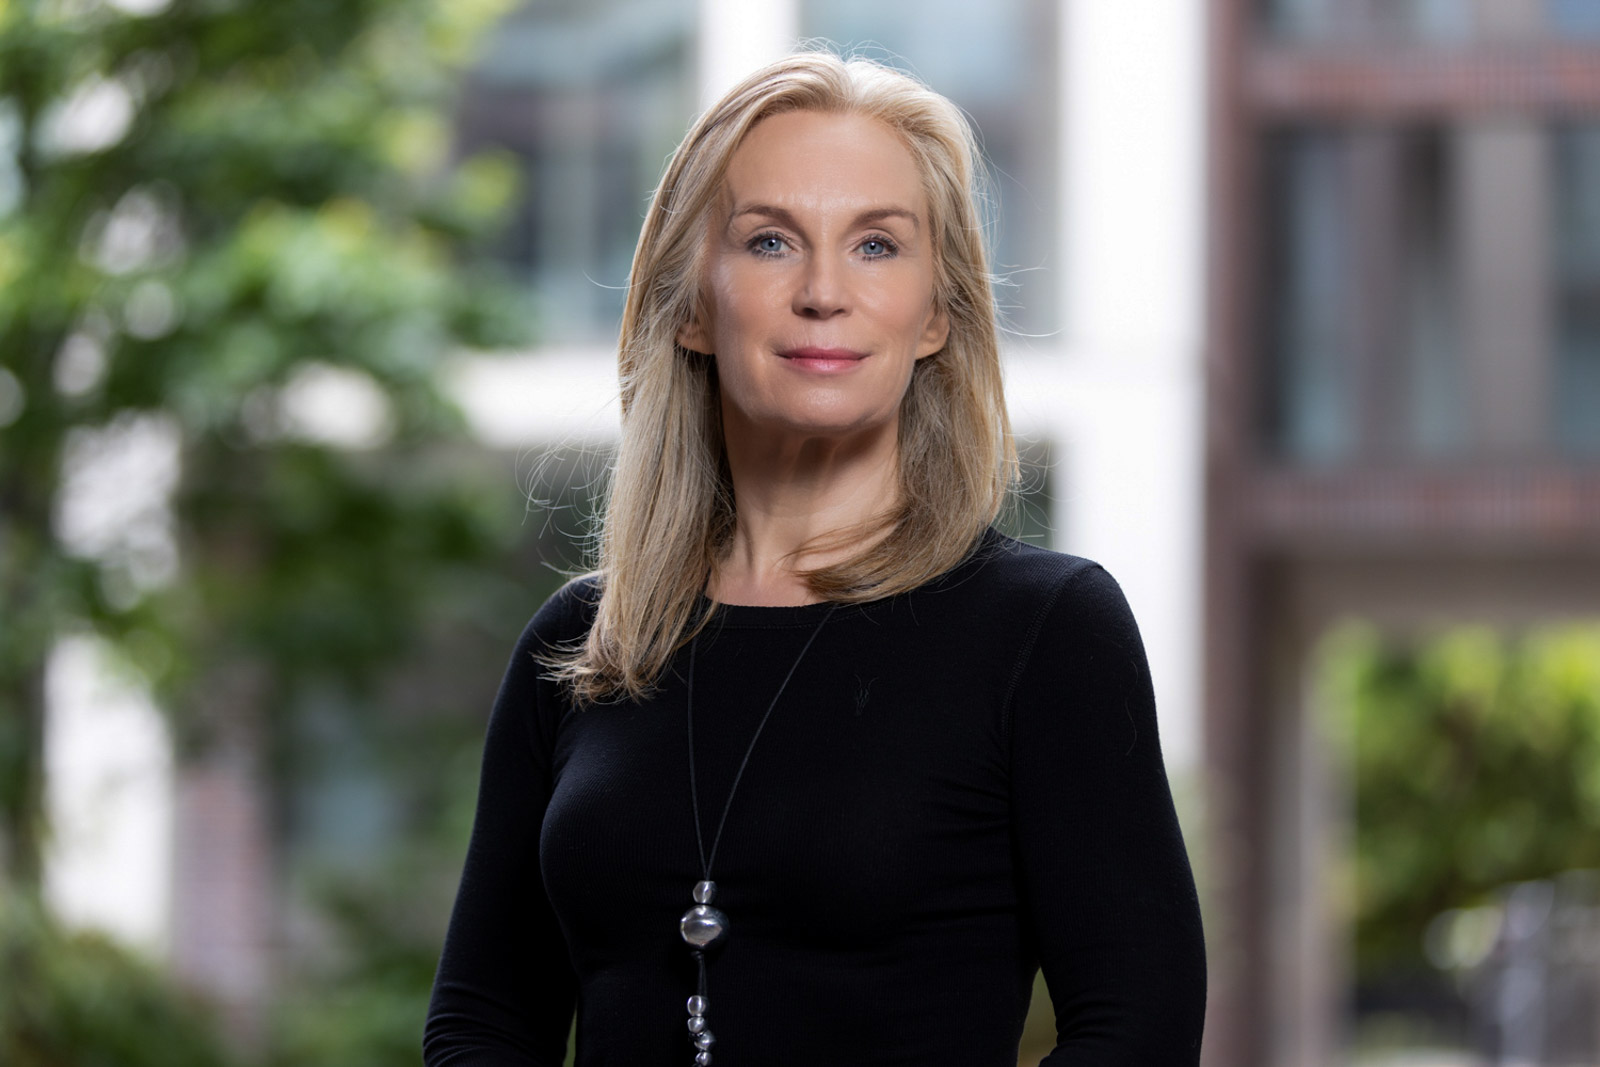 Woman standing outdoors with office block behind. Dublin corporate headshots